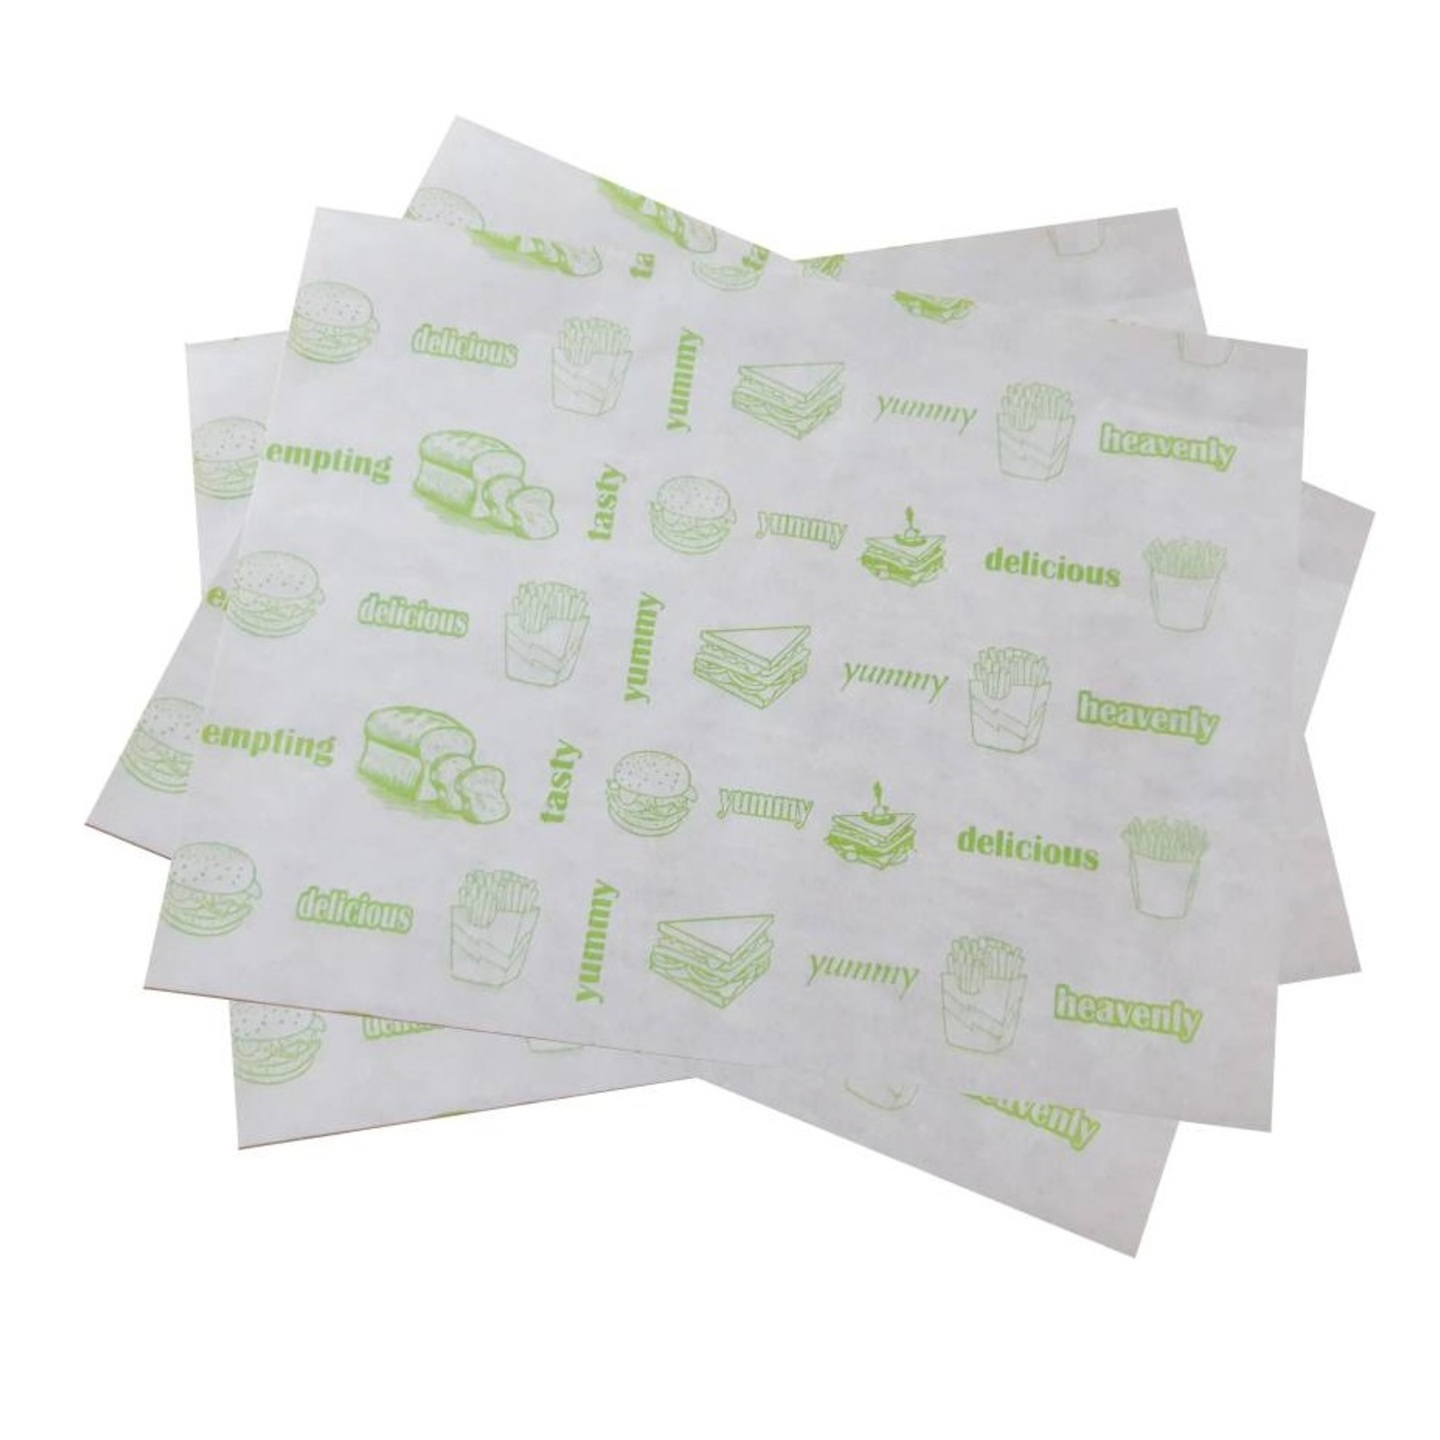 Grease Proof Food Wrapping Sheets (11x12 inch)